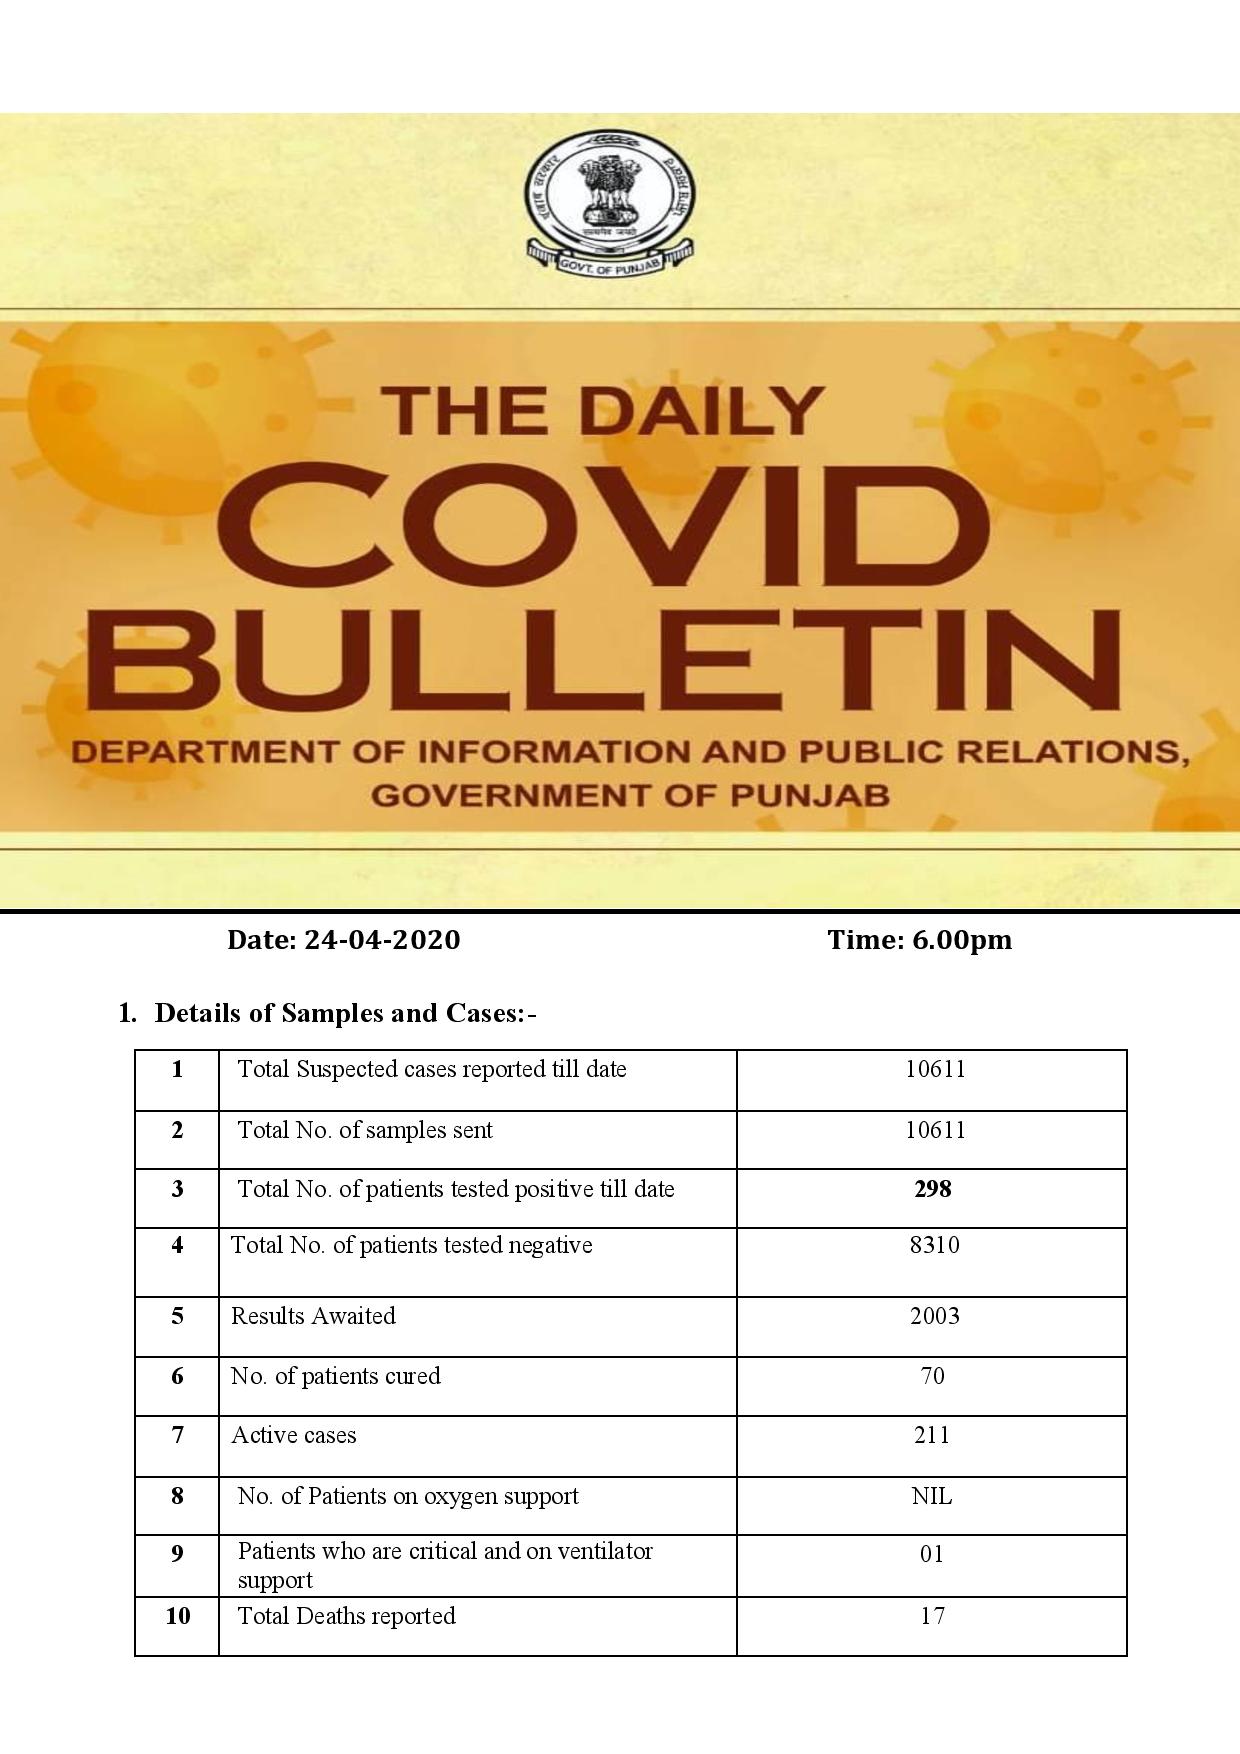 Covid-19 updates; double digit increase; another newspaper employee tested positive in Punjab